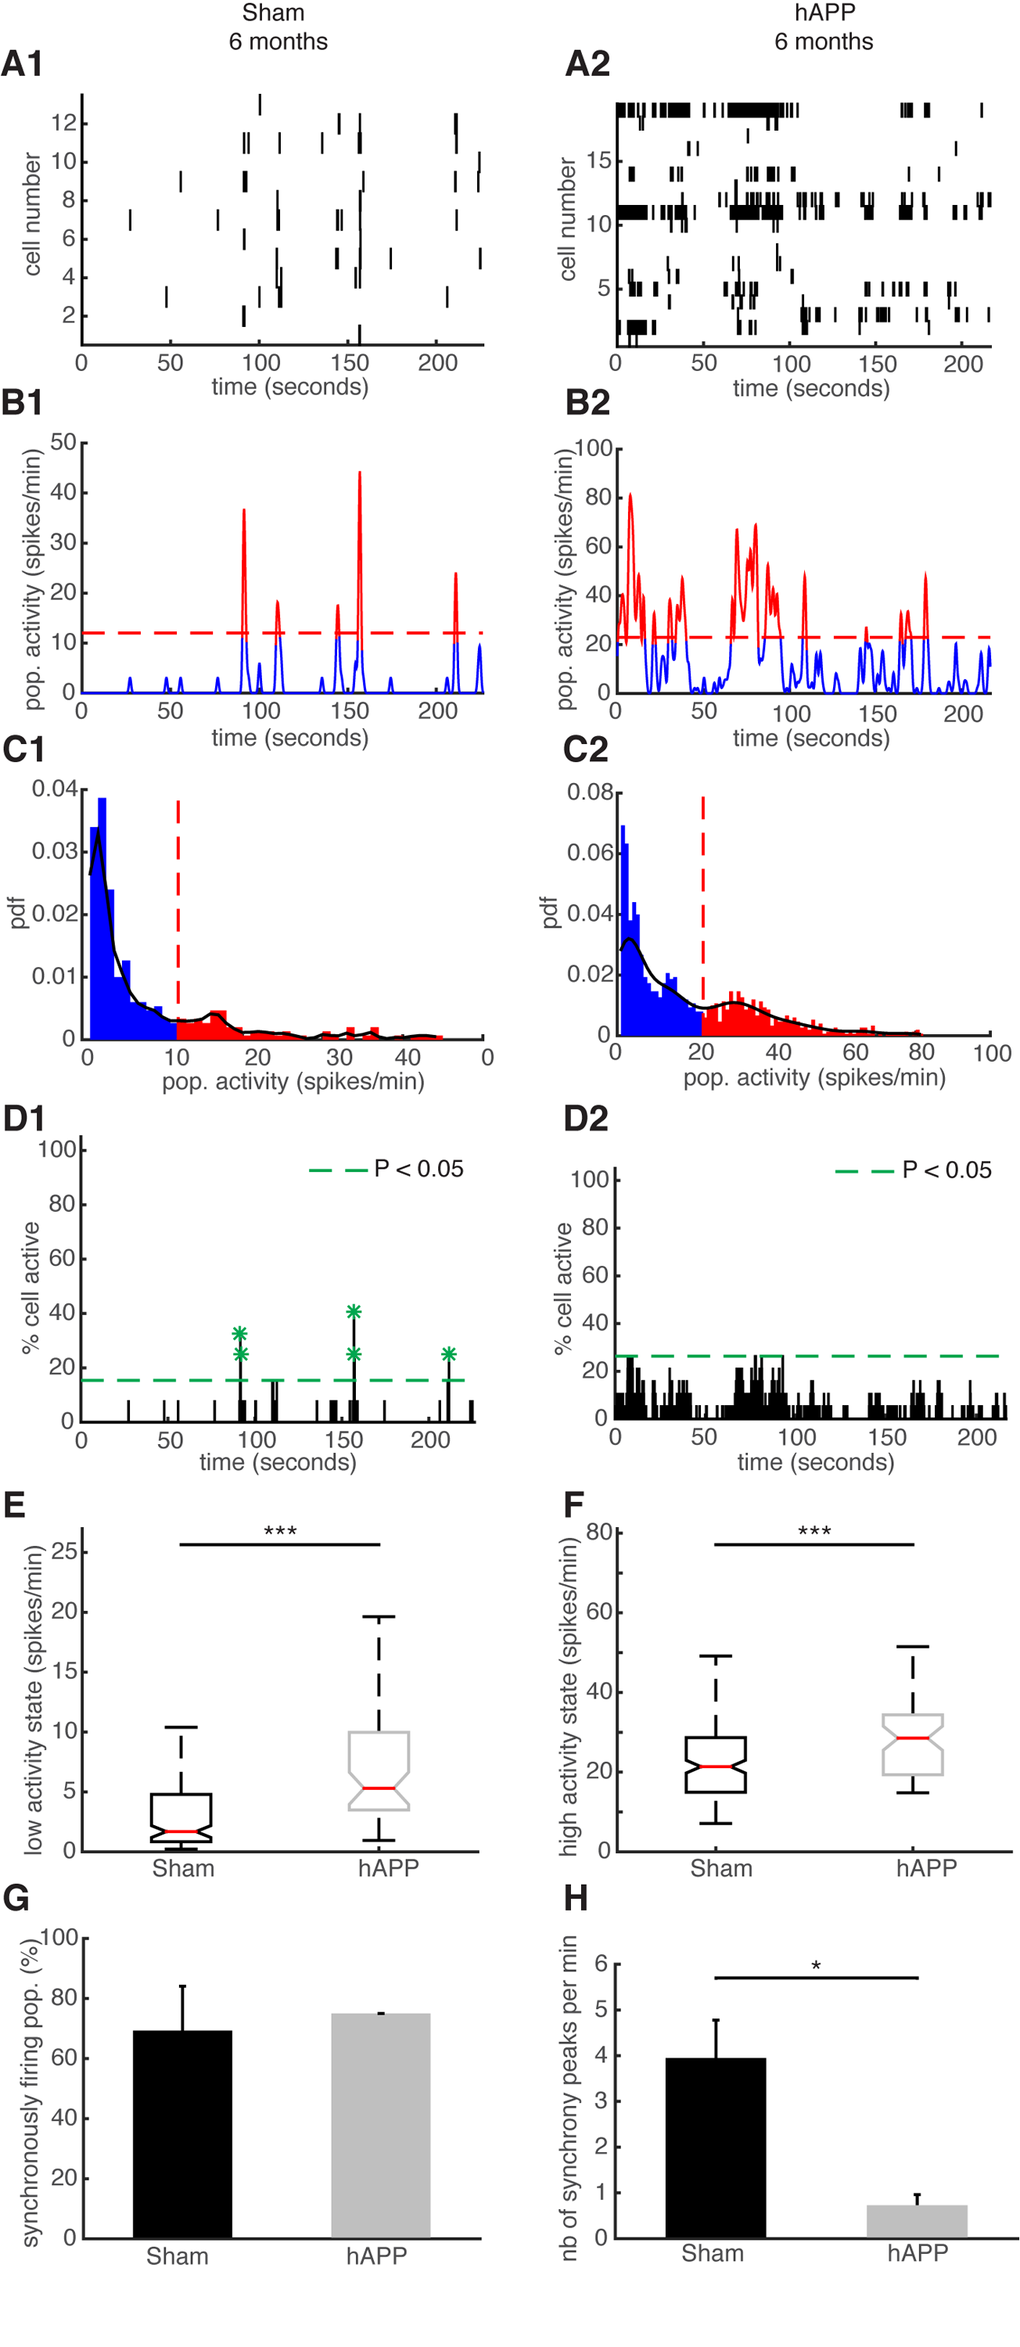 Neuronal synchronicity is disrupted in the PFC of hAPP mice 6 mpi. (A) Representative raster plots for one population of simultaneously recorded neurons. Each row corresponds to the spiking activity of one neuron. (B) Mean neural activity for the populations in (A). The activity was smoothed through Gaussian filtering. The red periods correspond to the high activity states and the blue periods to the low activity states. The dotted red line represents the computed threshold between the two states. (C) Probability density function (pdf) of the population activity exhibited in (B). The black line represents the smoothed pdf, through Gaussian filtering. Red bars represent the high activity states and blue bars the low activity states. (D) Histogram representing the percentage of cells active in small time bins (~ 0.144 sec), for the population activity in (A). Asterisks mark significant peaks of synchrony. (E) Boxplots of low activity states for each mouse group (spikes/min). (F) Boxplots of high activity states for each mouse group (spikes/min). (G) Percentage of populations (simultaneously imaged neurons) exhibiting synchronous activity. (H) Mean number of synchrony peaks per minute for the different animal groups. (1) sham and (2) hAPP mice.